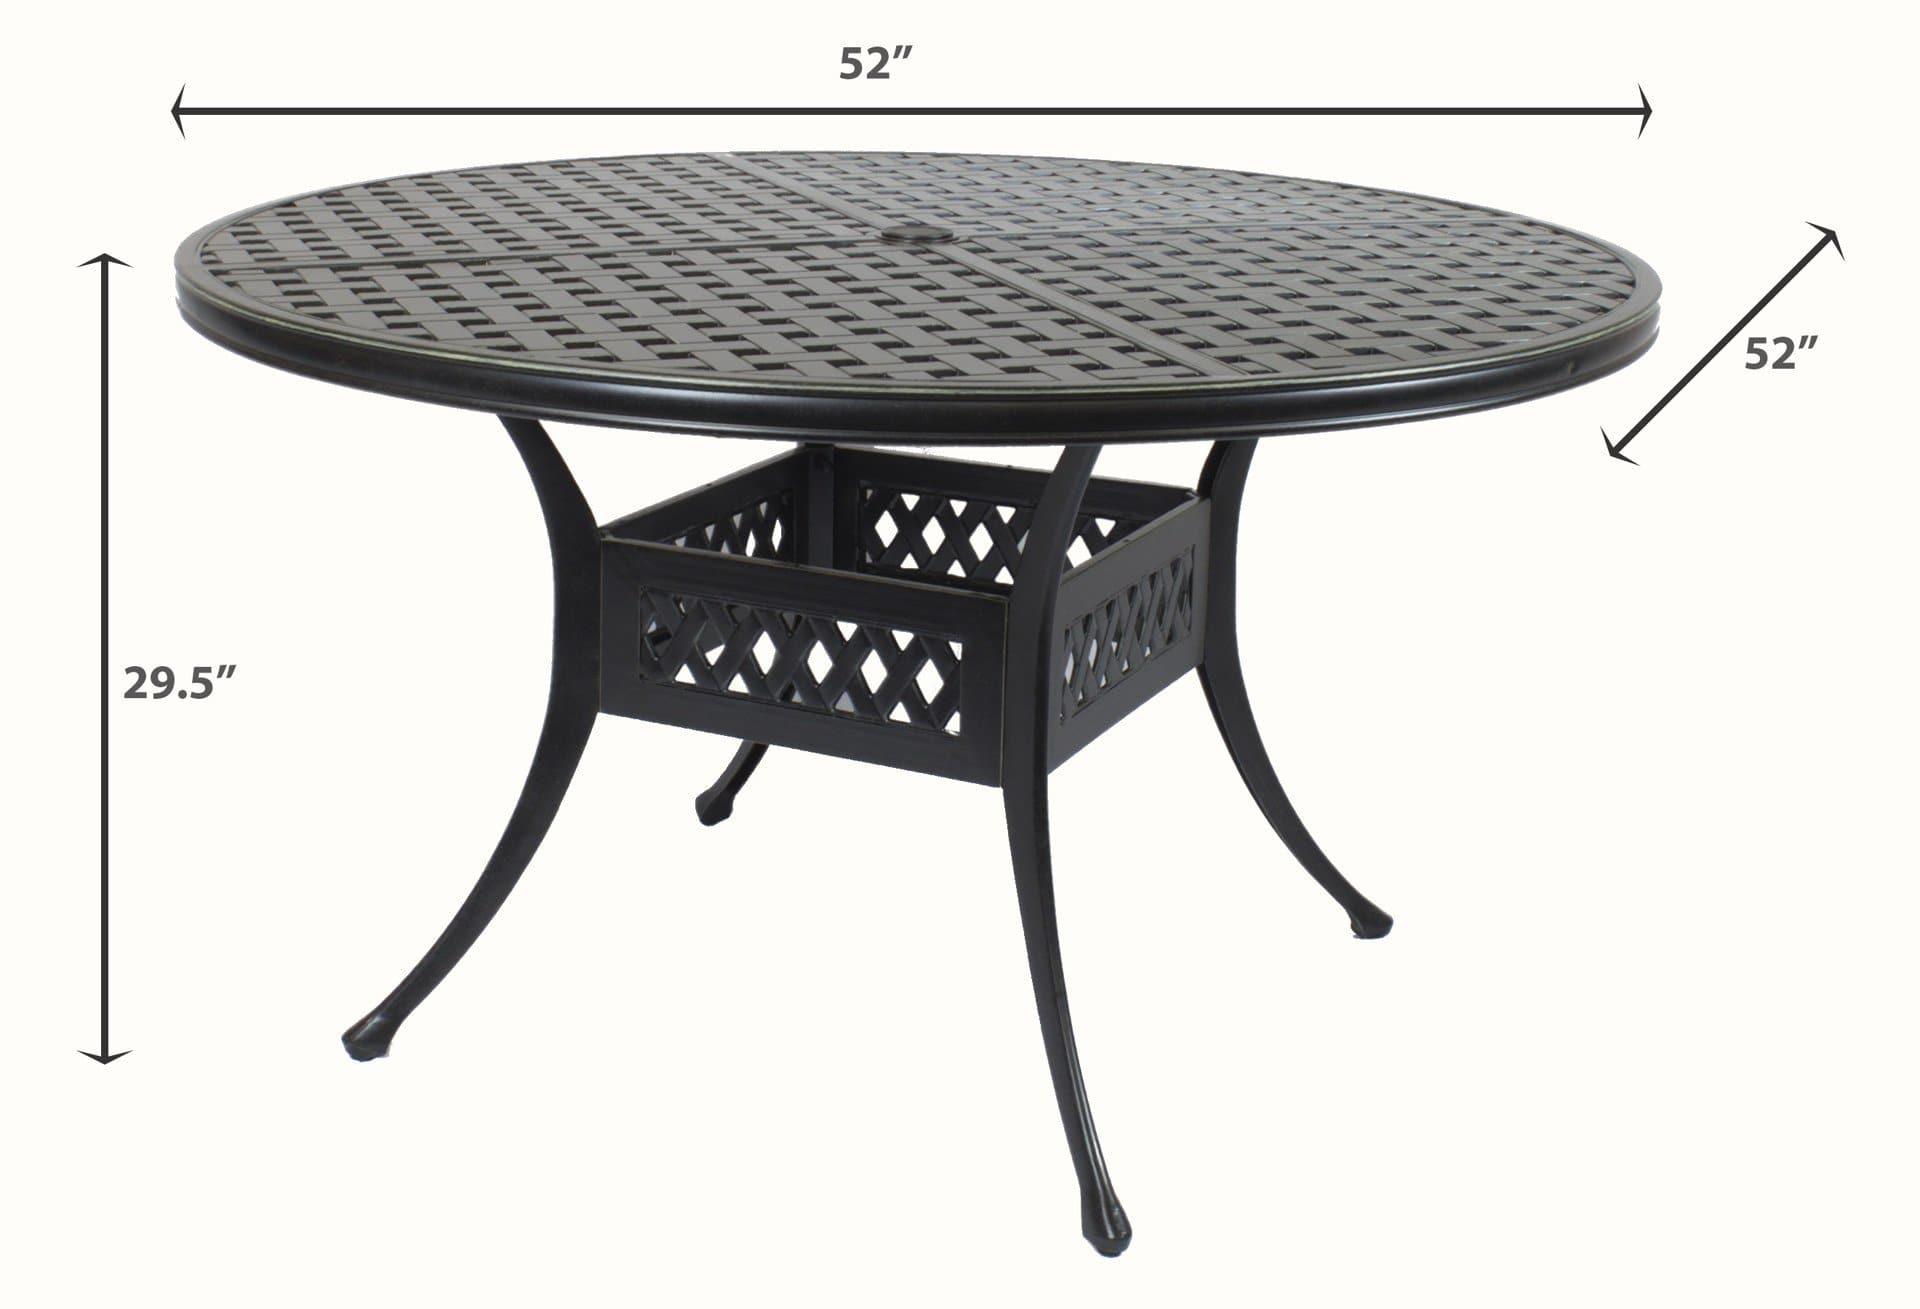 Comfort Care St. Tropez Outdoor Patio Dining Tables - Senior.com Dining Tables